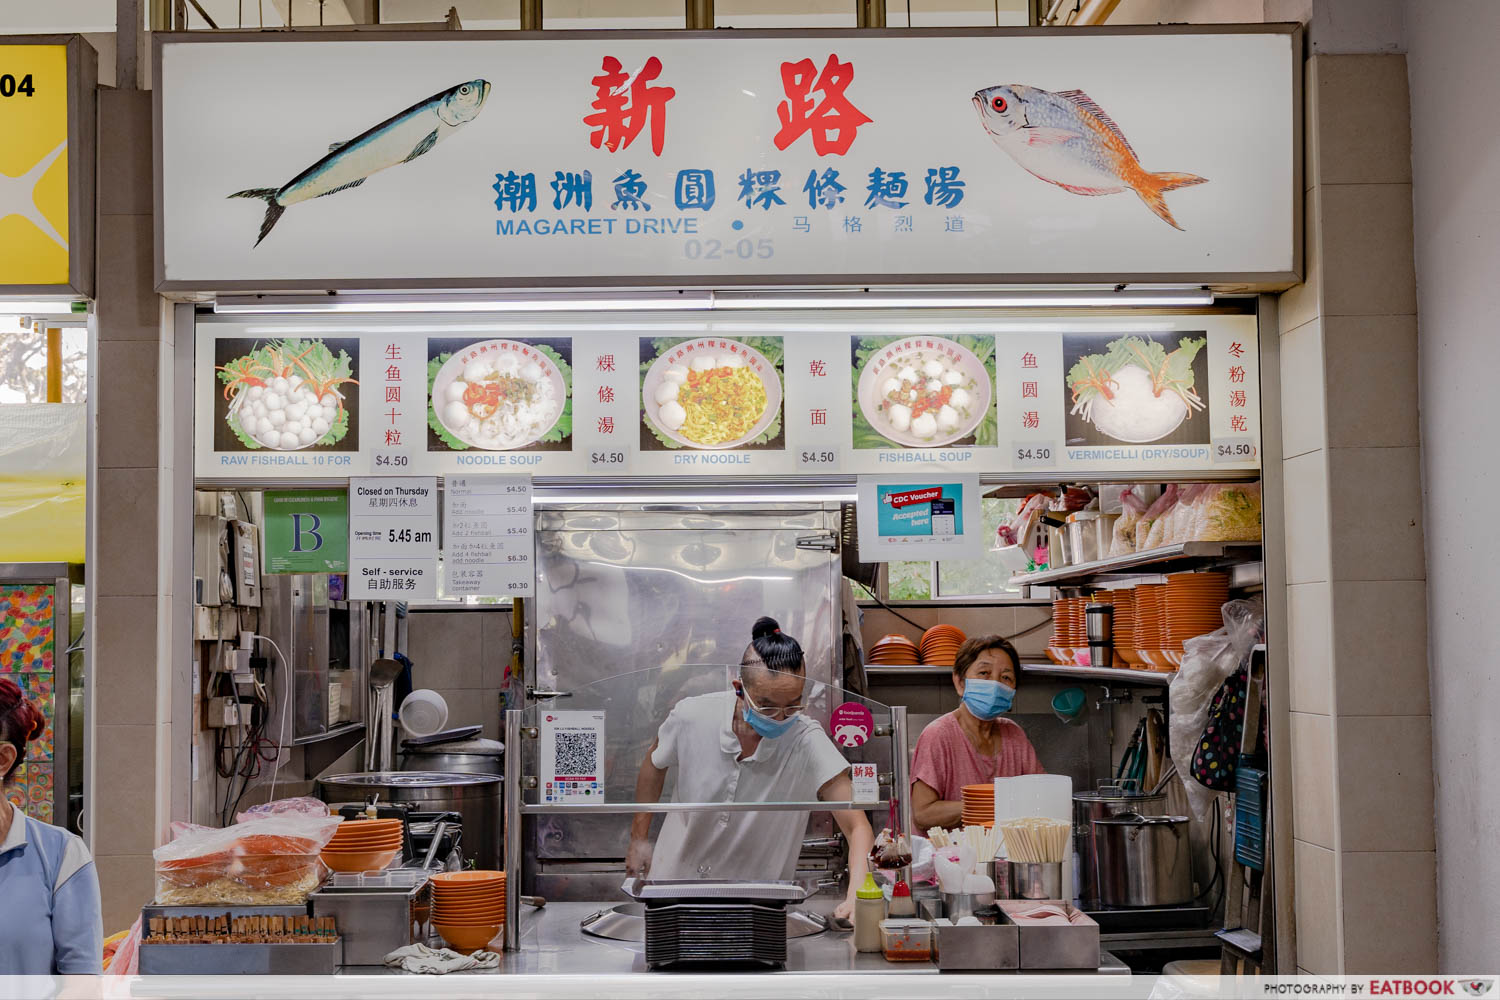 xin lu fishball noodle - storefront